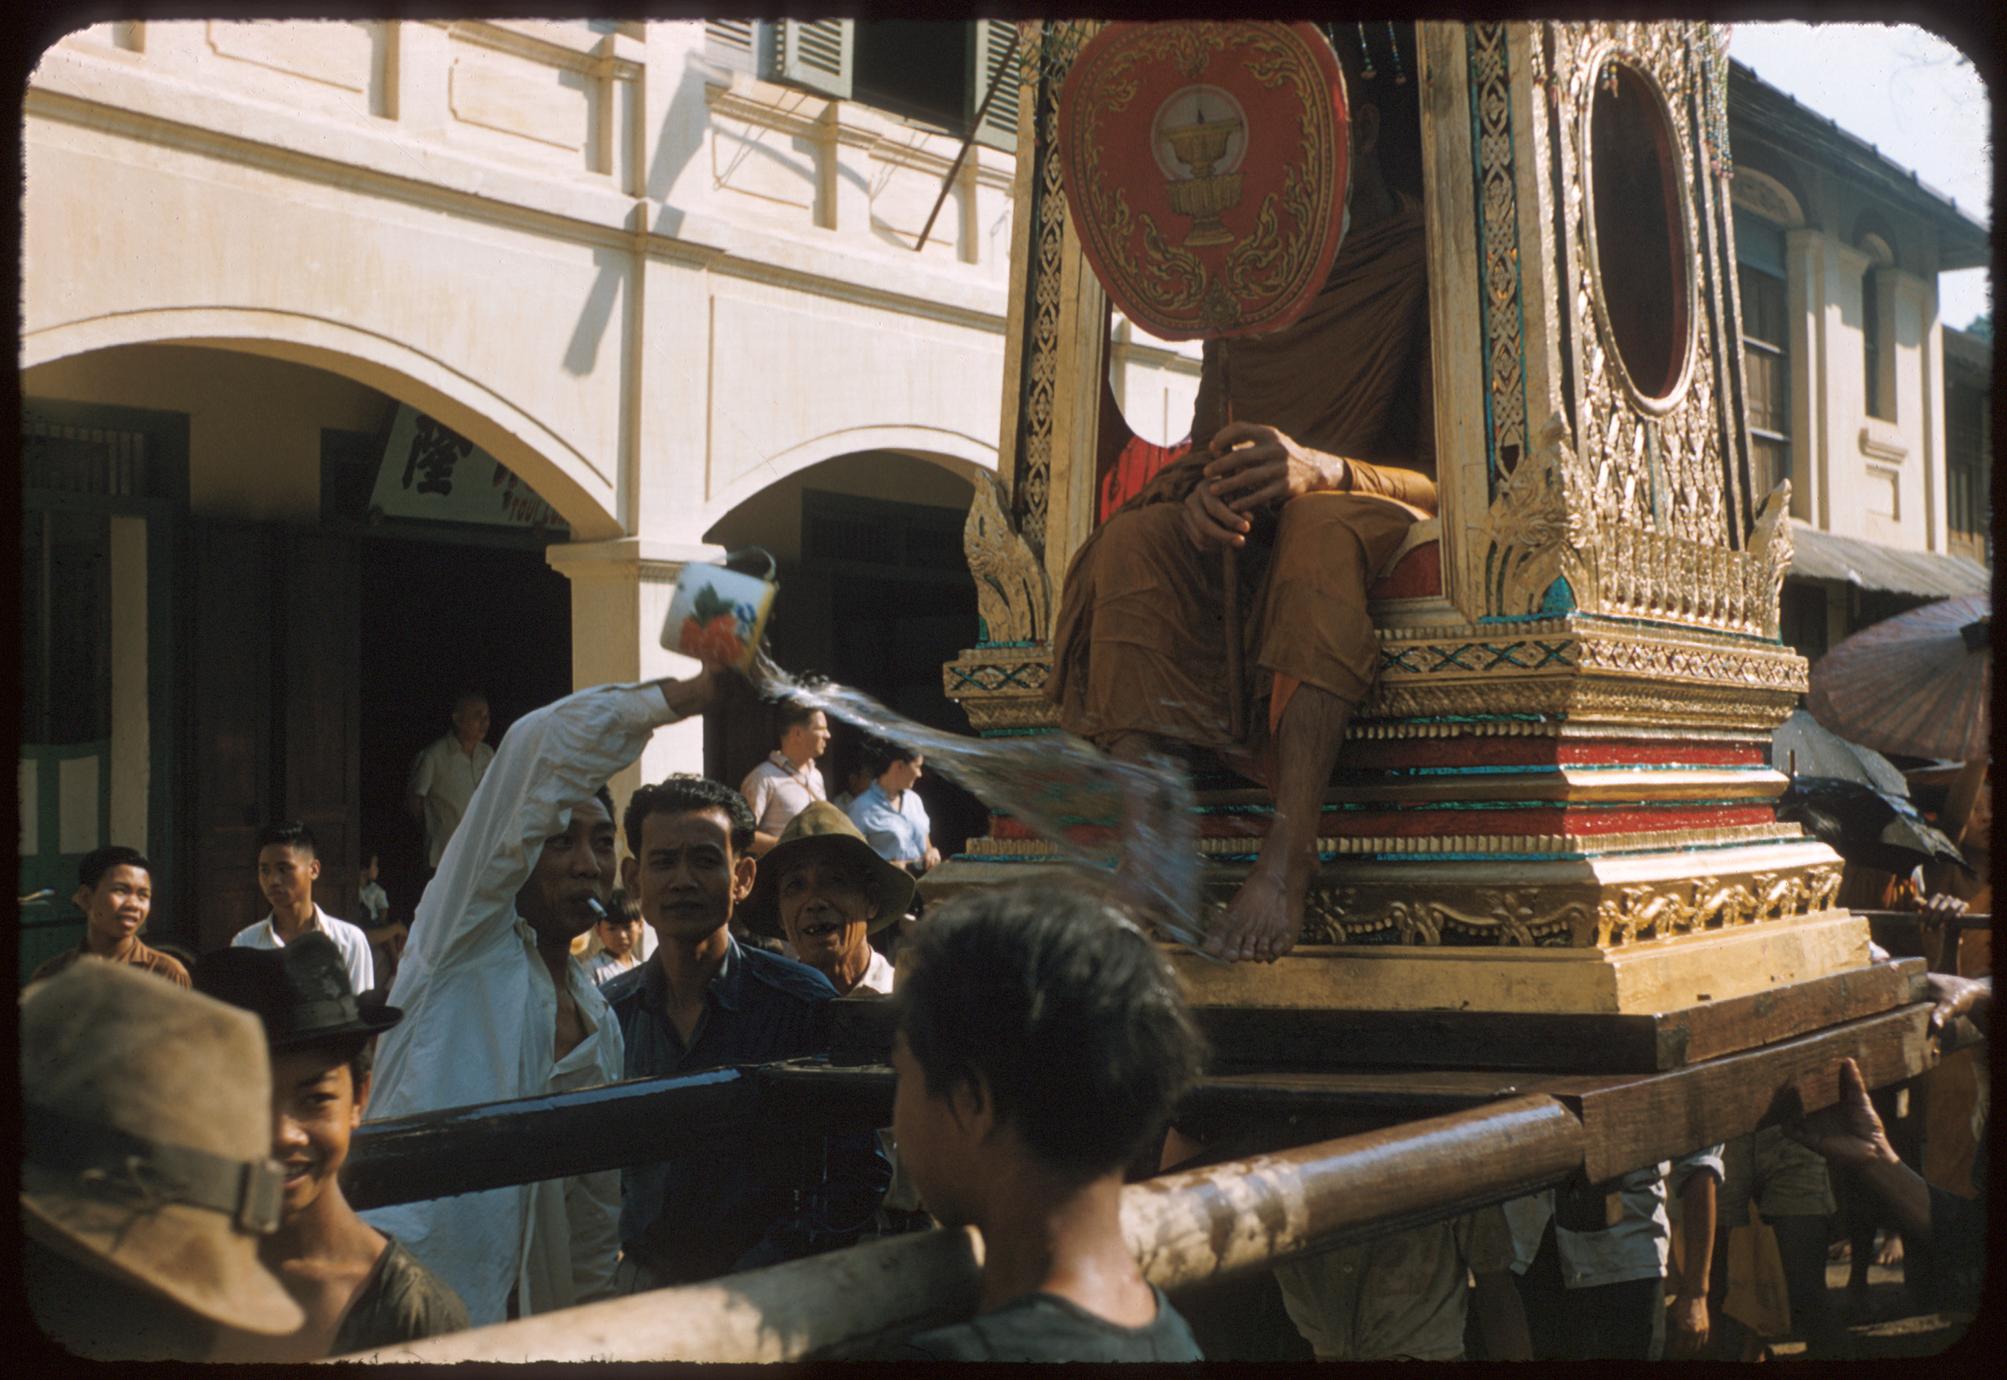 Carrying monk on palanquin